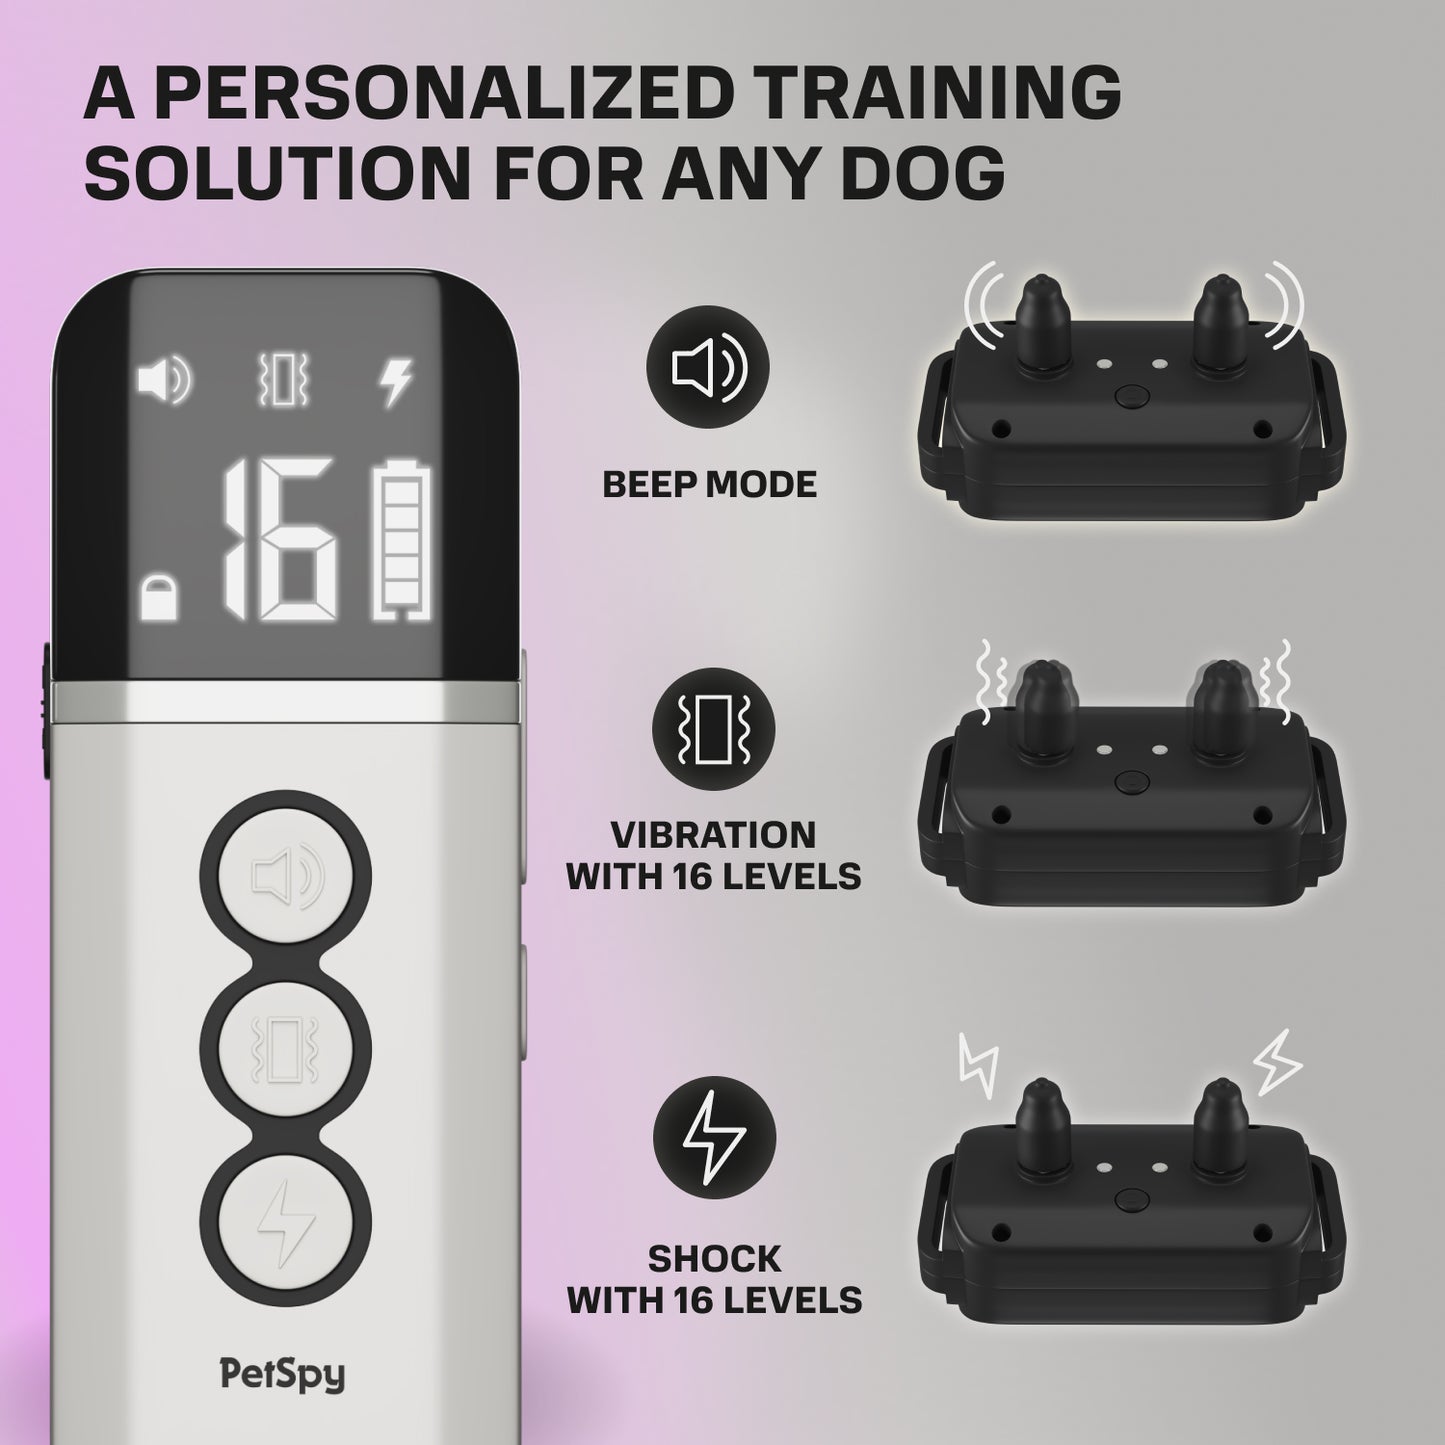 N20 Shock collar for dogs - a personalized training solution for any dog